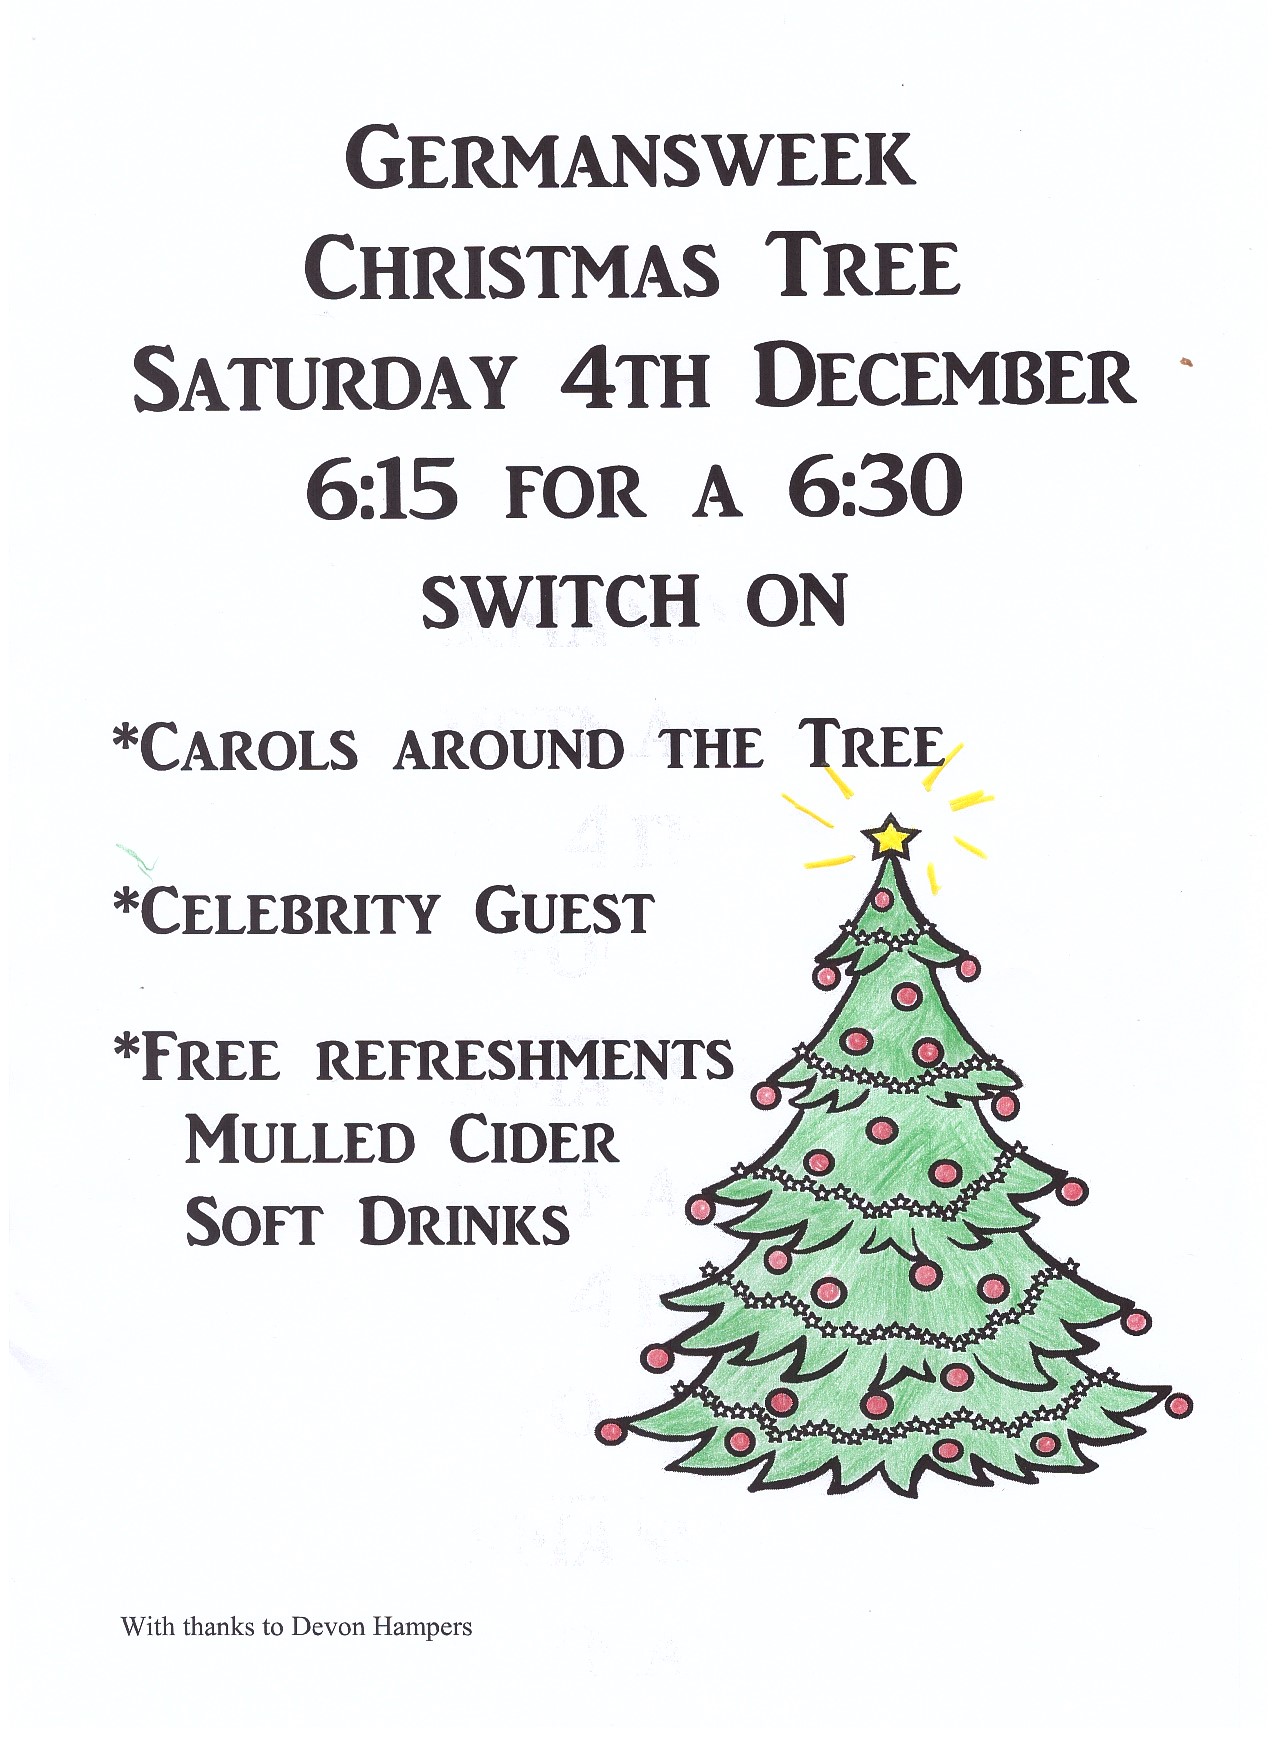 A Christmas tree with details about mulled cider, soft drinks, special guest and sing along